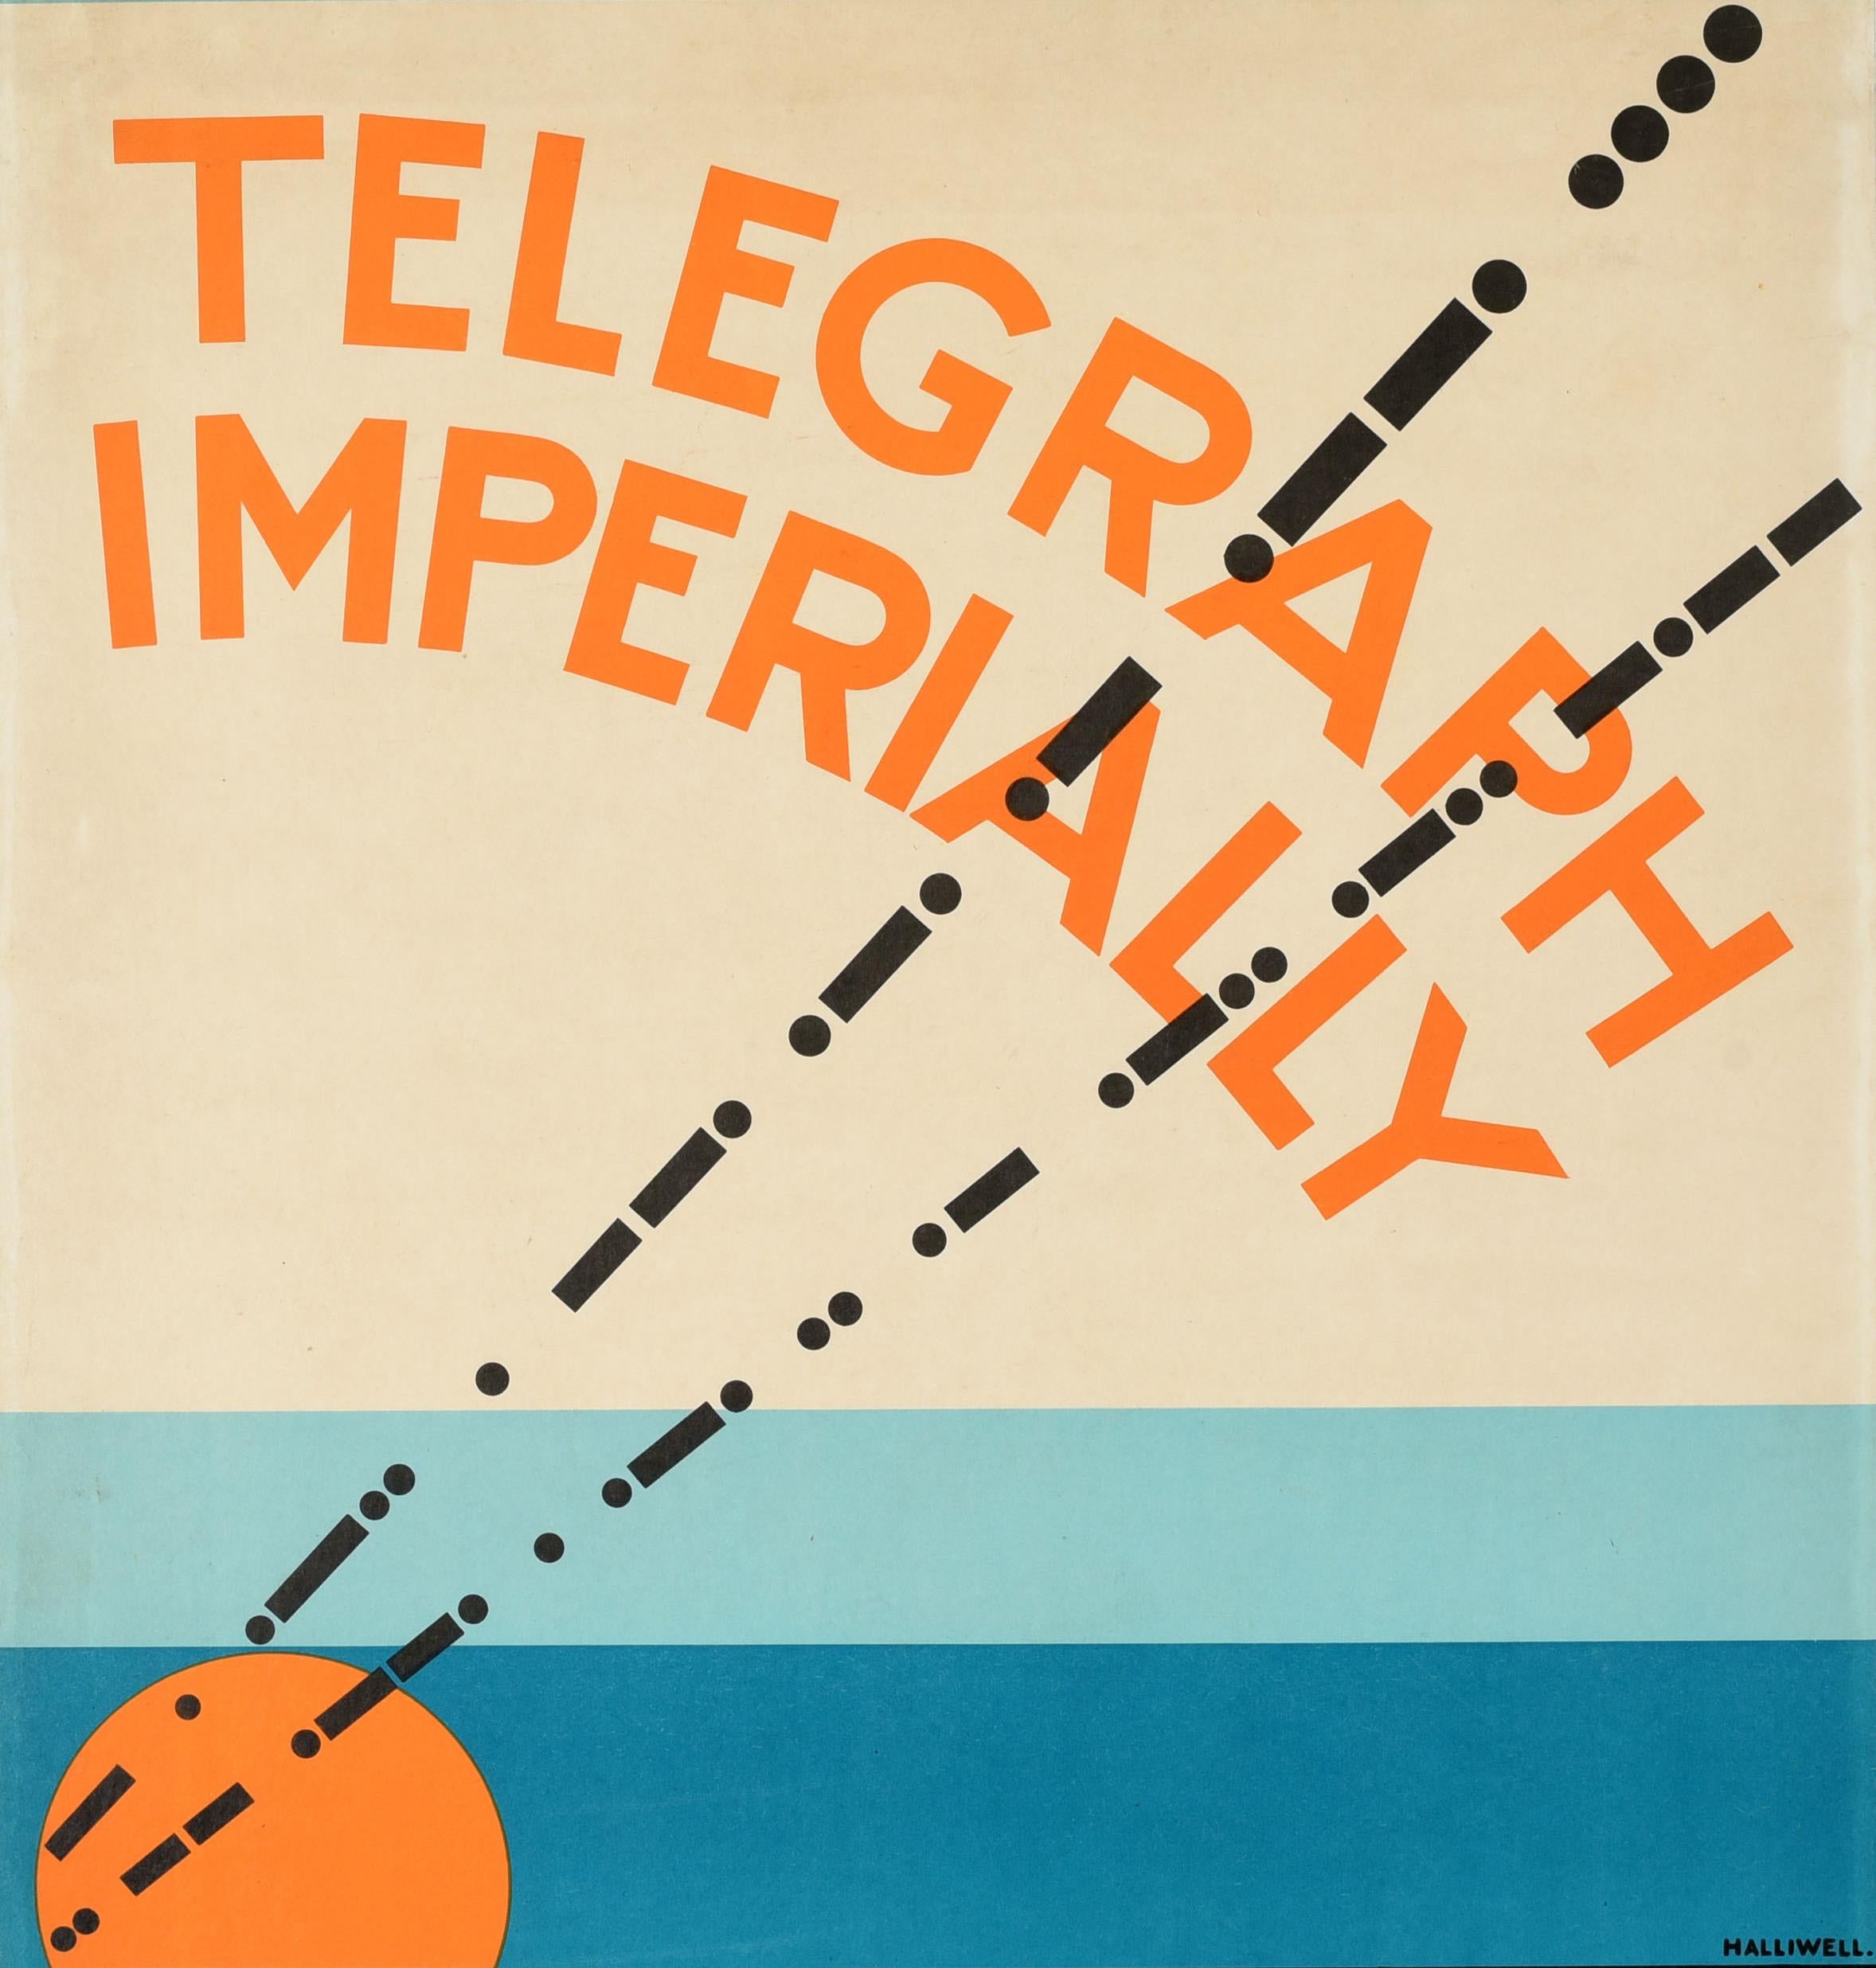 Original vintage advertising poster - Telegraph Imperially via Imperial Eastern Empiradio Marconi - featuring a great graphic design depicting morse code running diagonally up from an orange and blue sun on the horizon with the stylised orange title